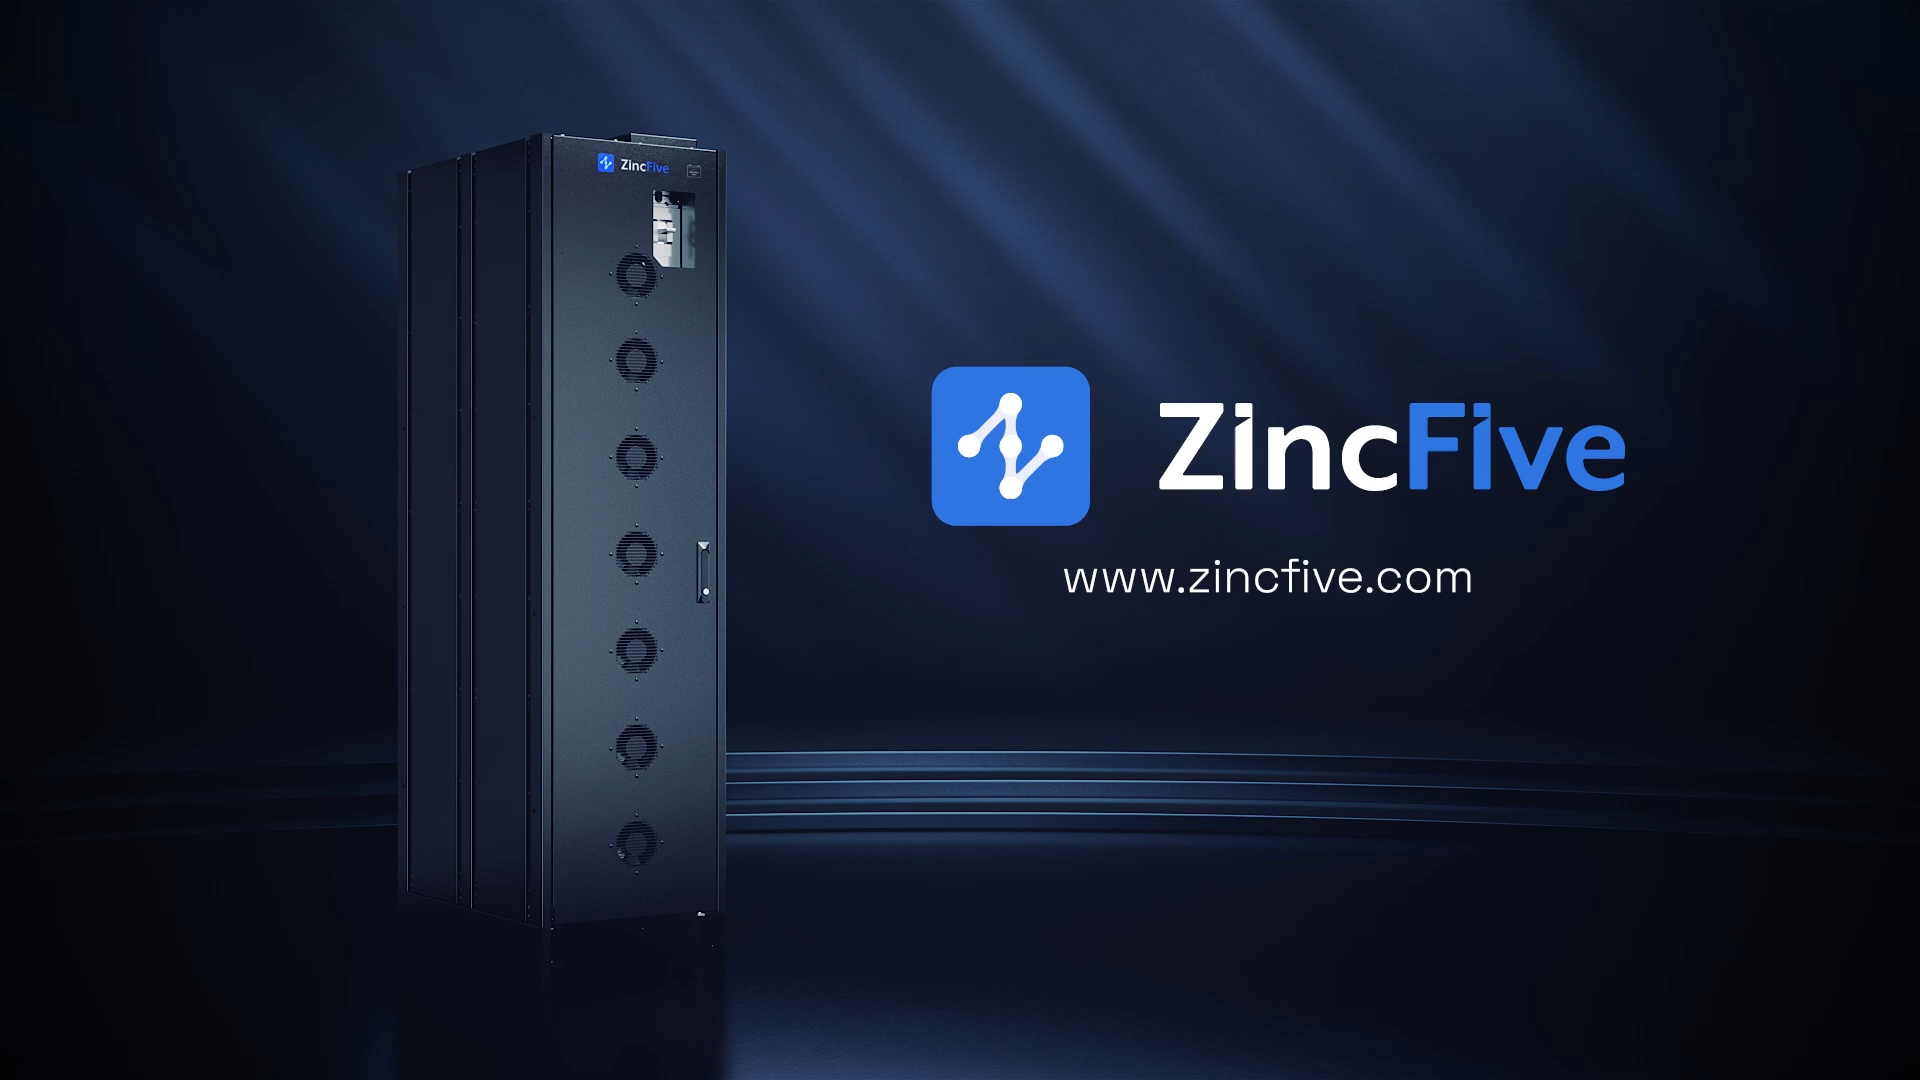 ZincFive's newest BC 2 Battery Cabinet provides optimized design and packaging while utilizing the same reliable NiZn batteries that have been delivering best-in-class power density as well as superior safety and sustainability for over 10 years.